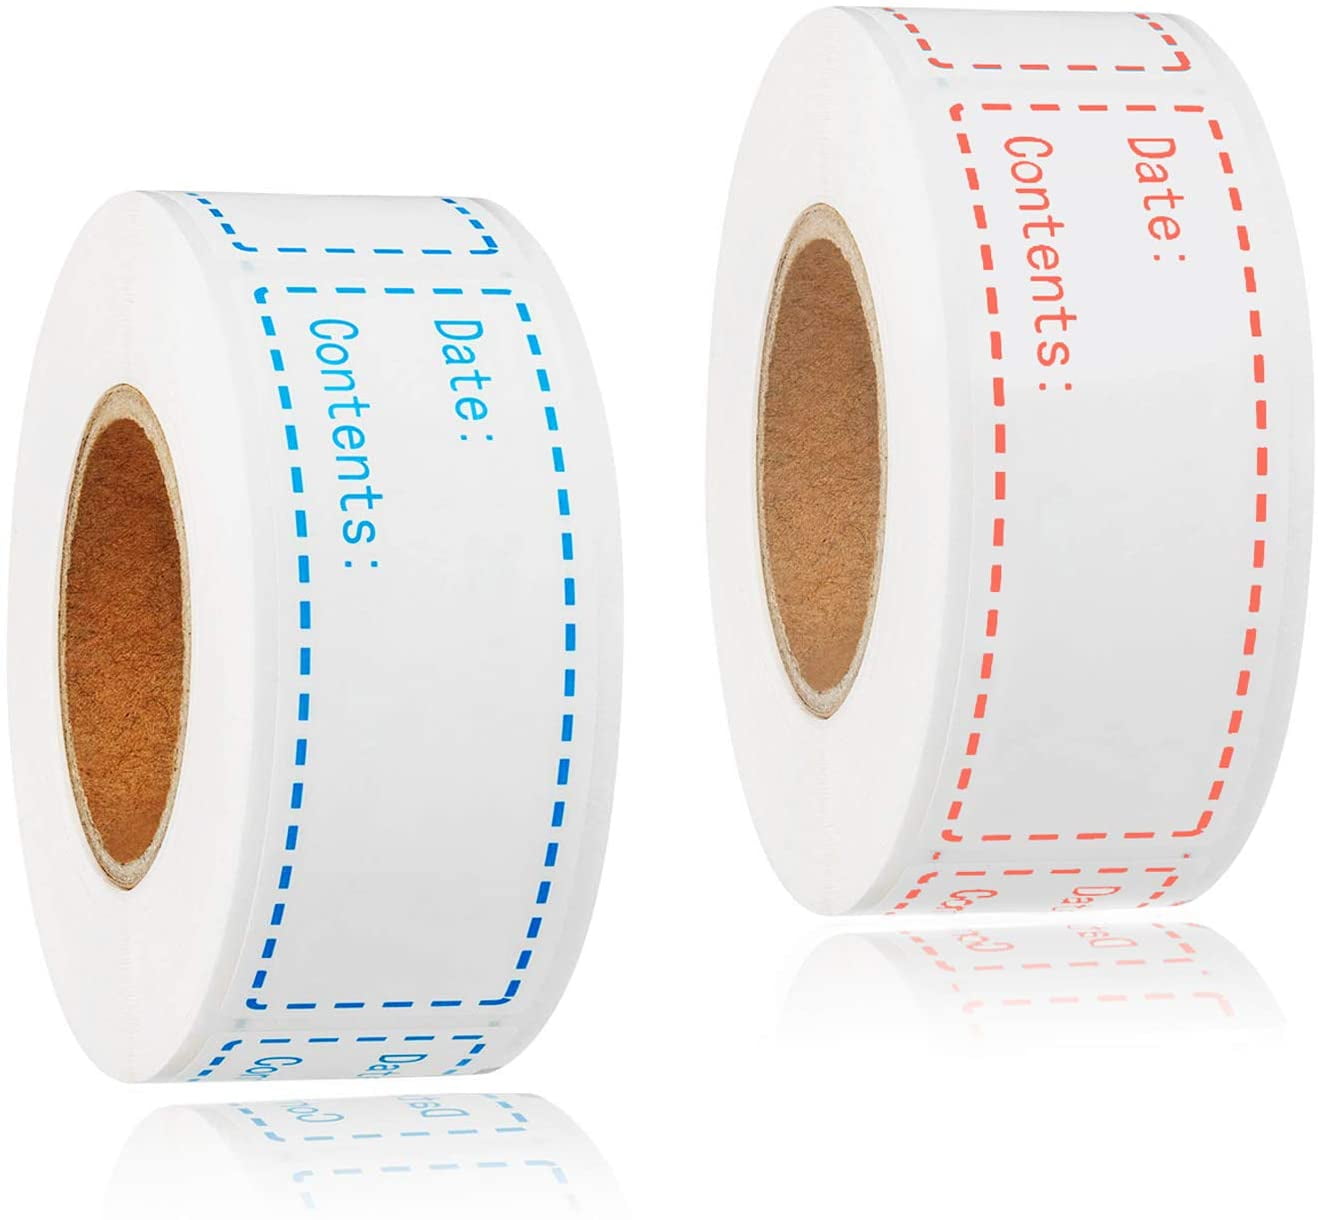 Large Variety Food Flavor Labels .625" x 1.25" 1000 labels per roll Stickers 